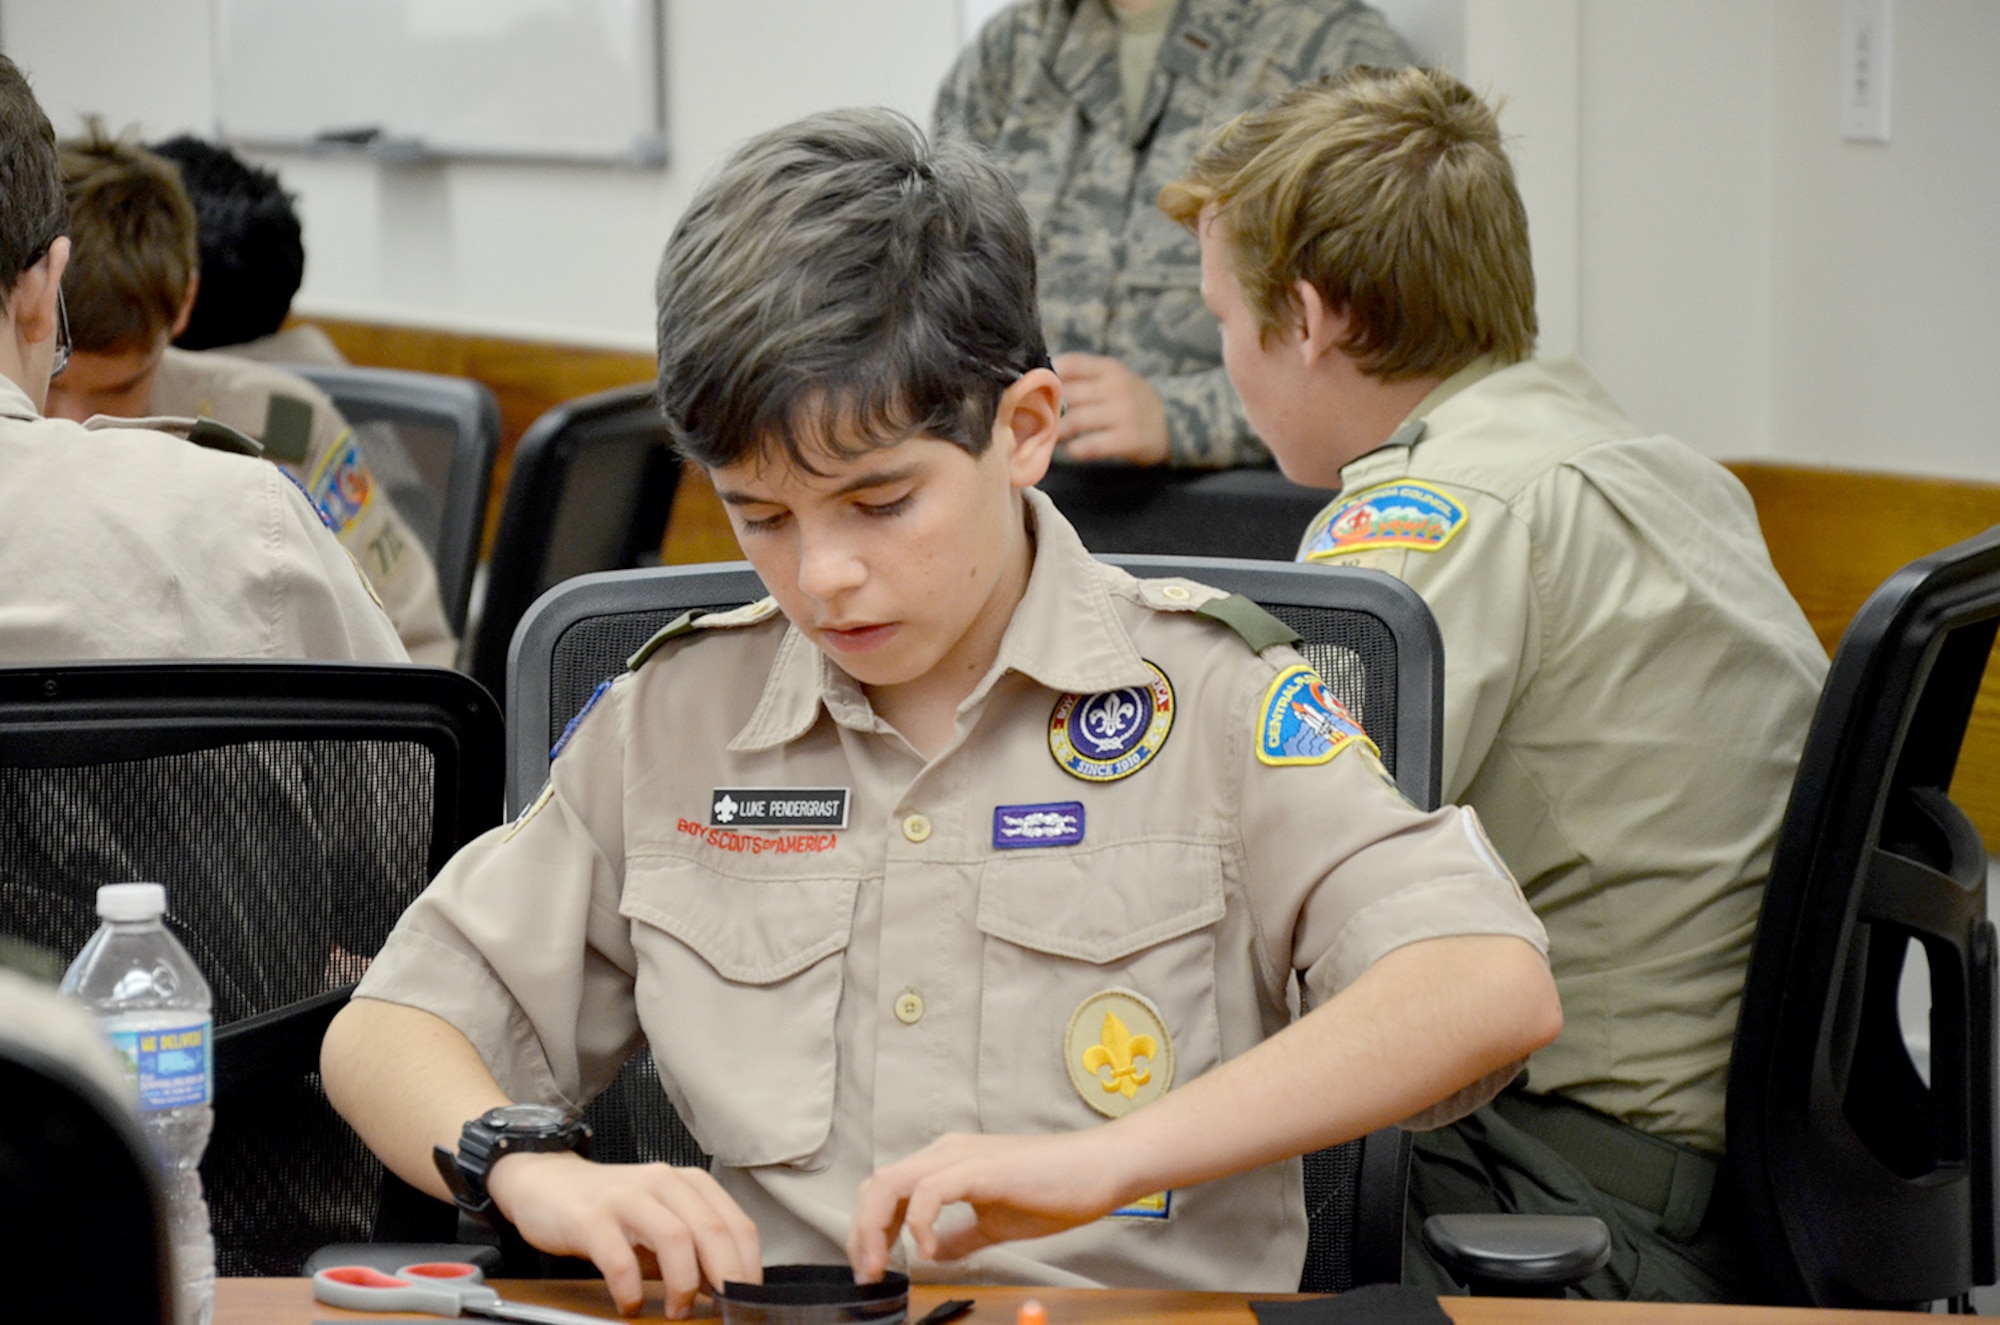 Luke Pendergrast, a Boy Scout from Troop 330 in Ormond Beach, Fla., carefully molds black felt in a petri dish to create a cloud chamber to visualize condensation trails left by ionizing radiation.  Pendergrast attended the Nuclear Science Merit Badge event hosted by the Air Force Technical Applications Center, Patrick AFB, Fla,. March 31, 2018.  (U.S. Air Force photo by Susan A. Romano)